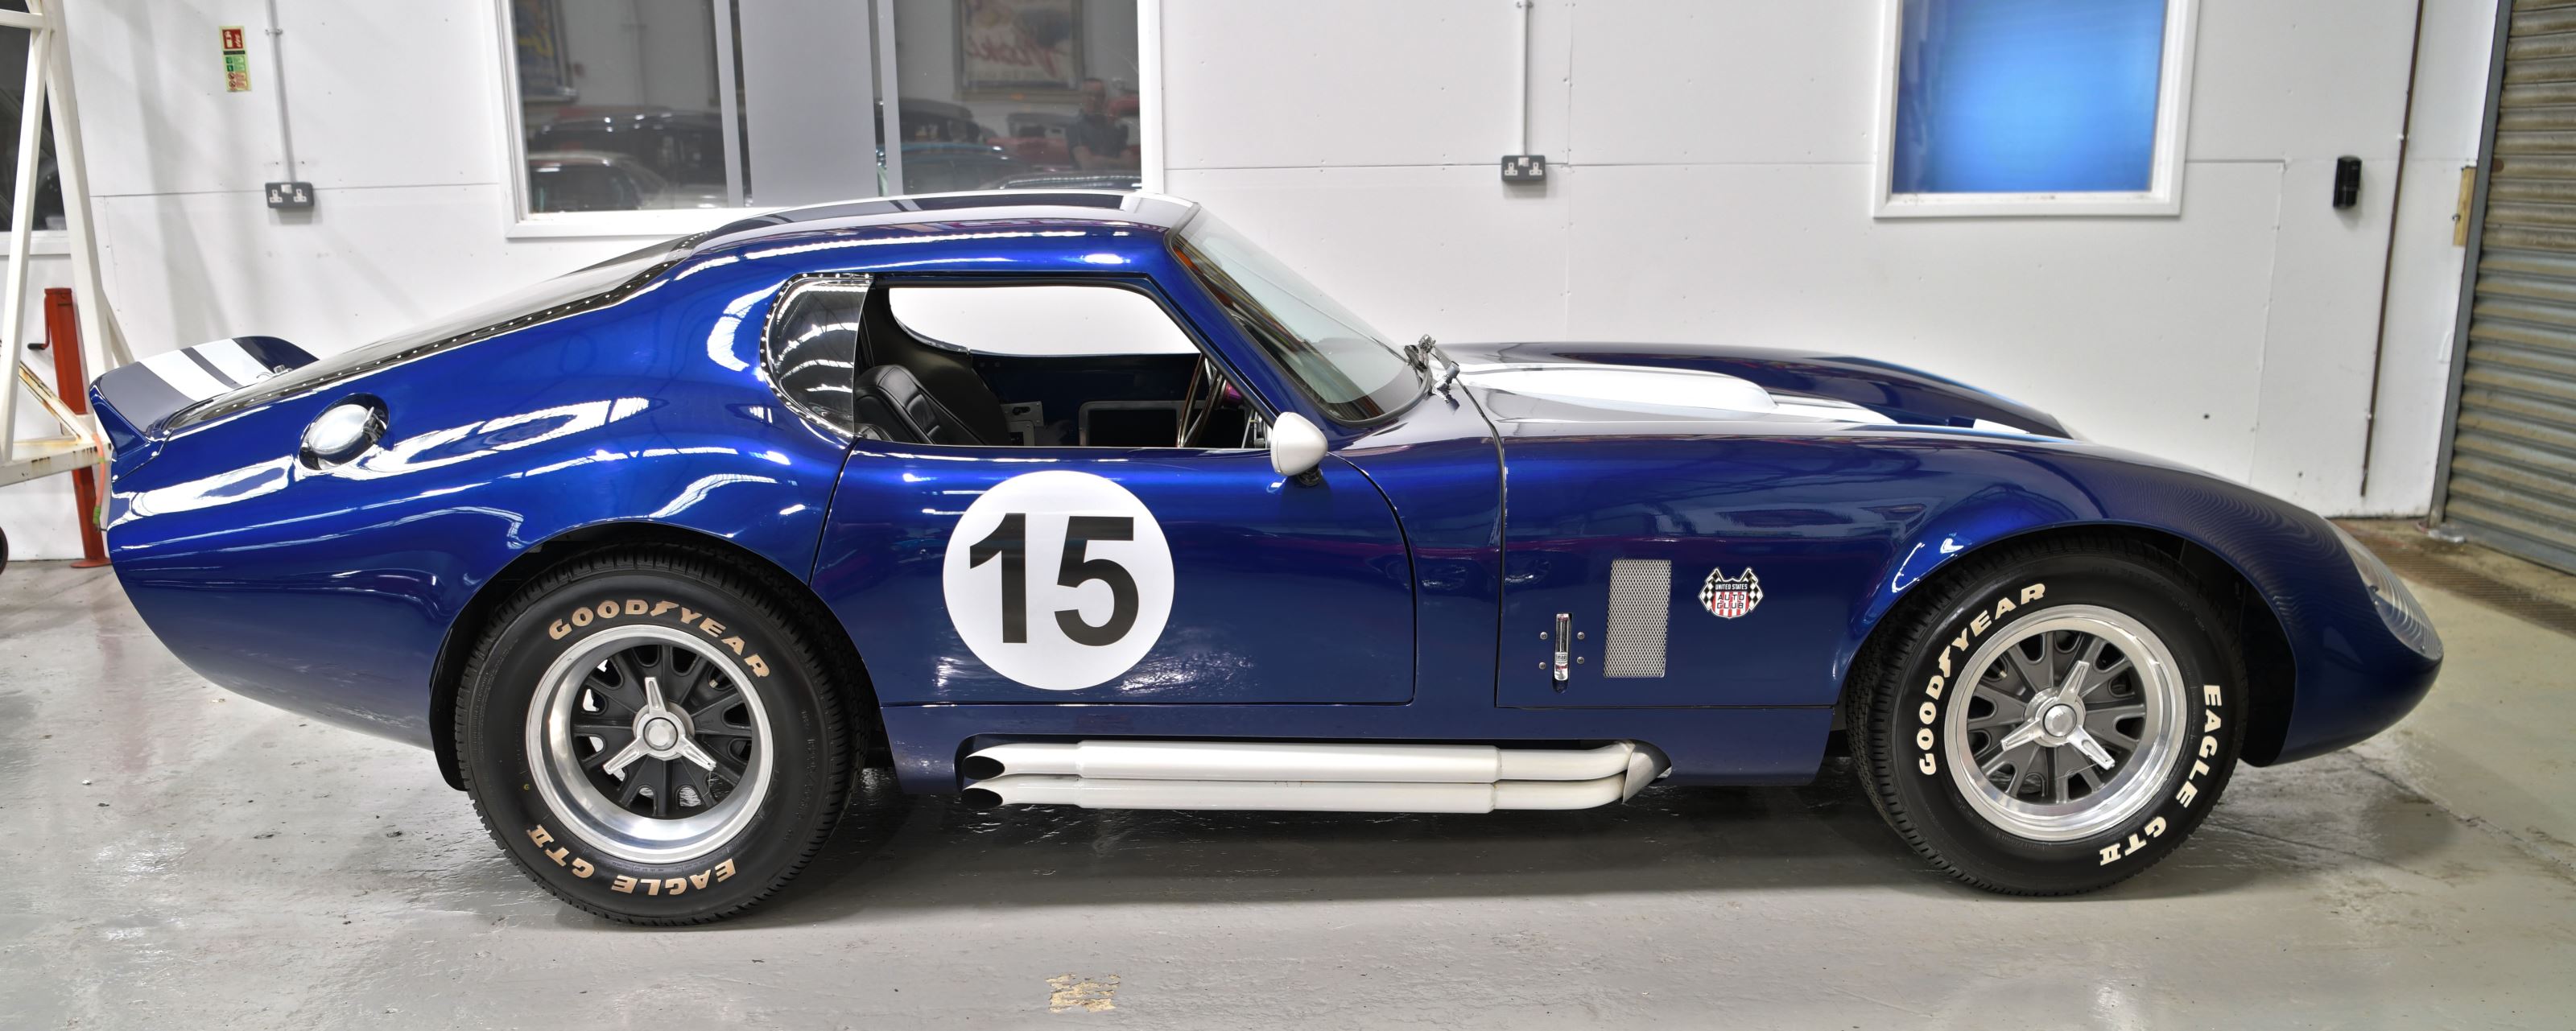 Ford factory five shelby daytona coupe replica 3o2l64t06jr1 zwlcz4cs